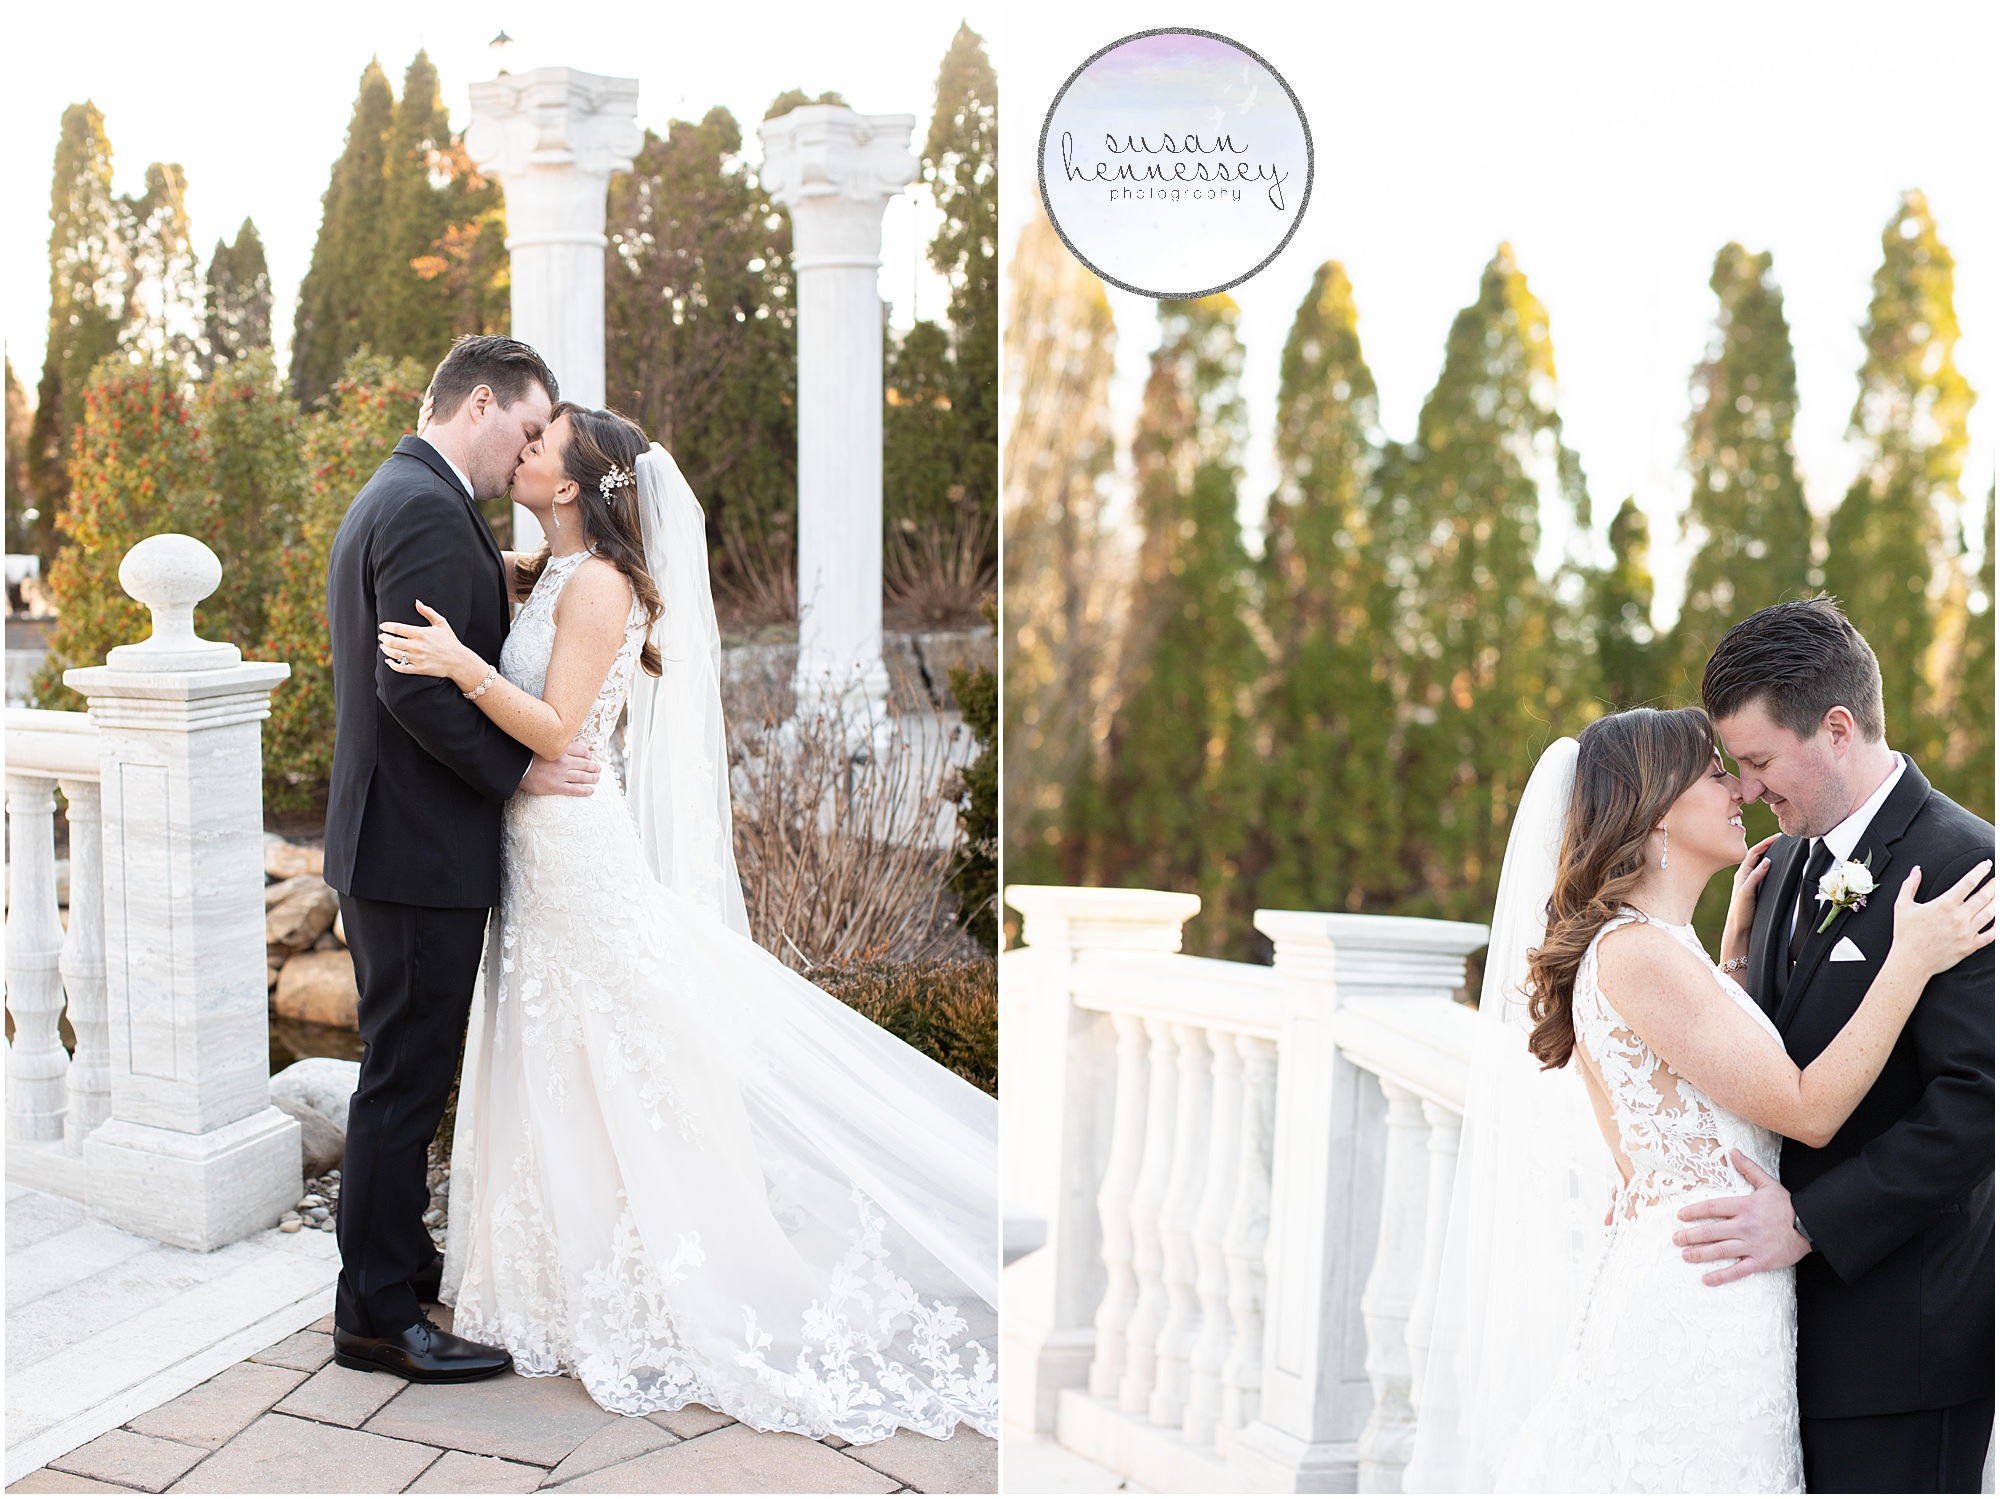 The Bridal Garden Archives Susan Hennessey Photography Blog